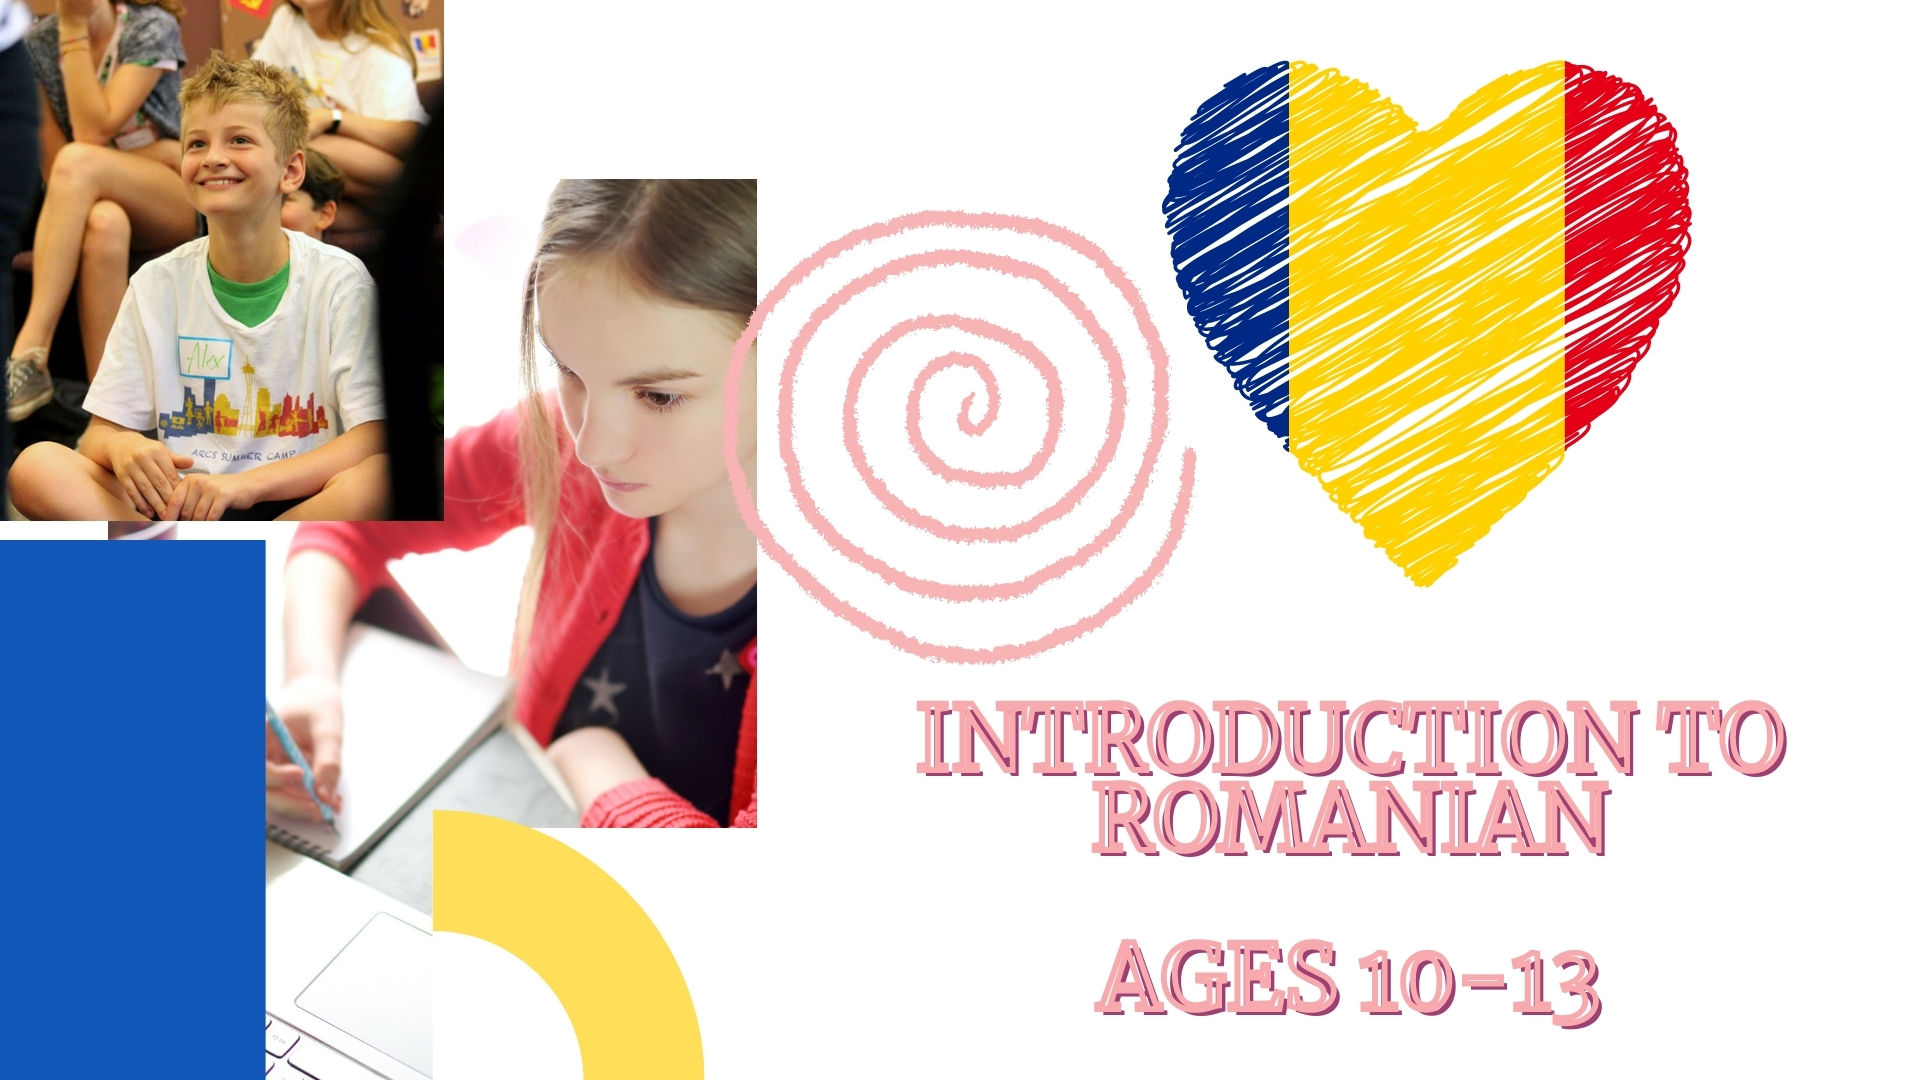 Introduction to Romanian Language and Culture (ages 10-13)